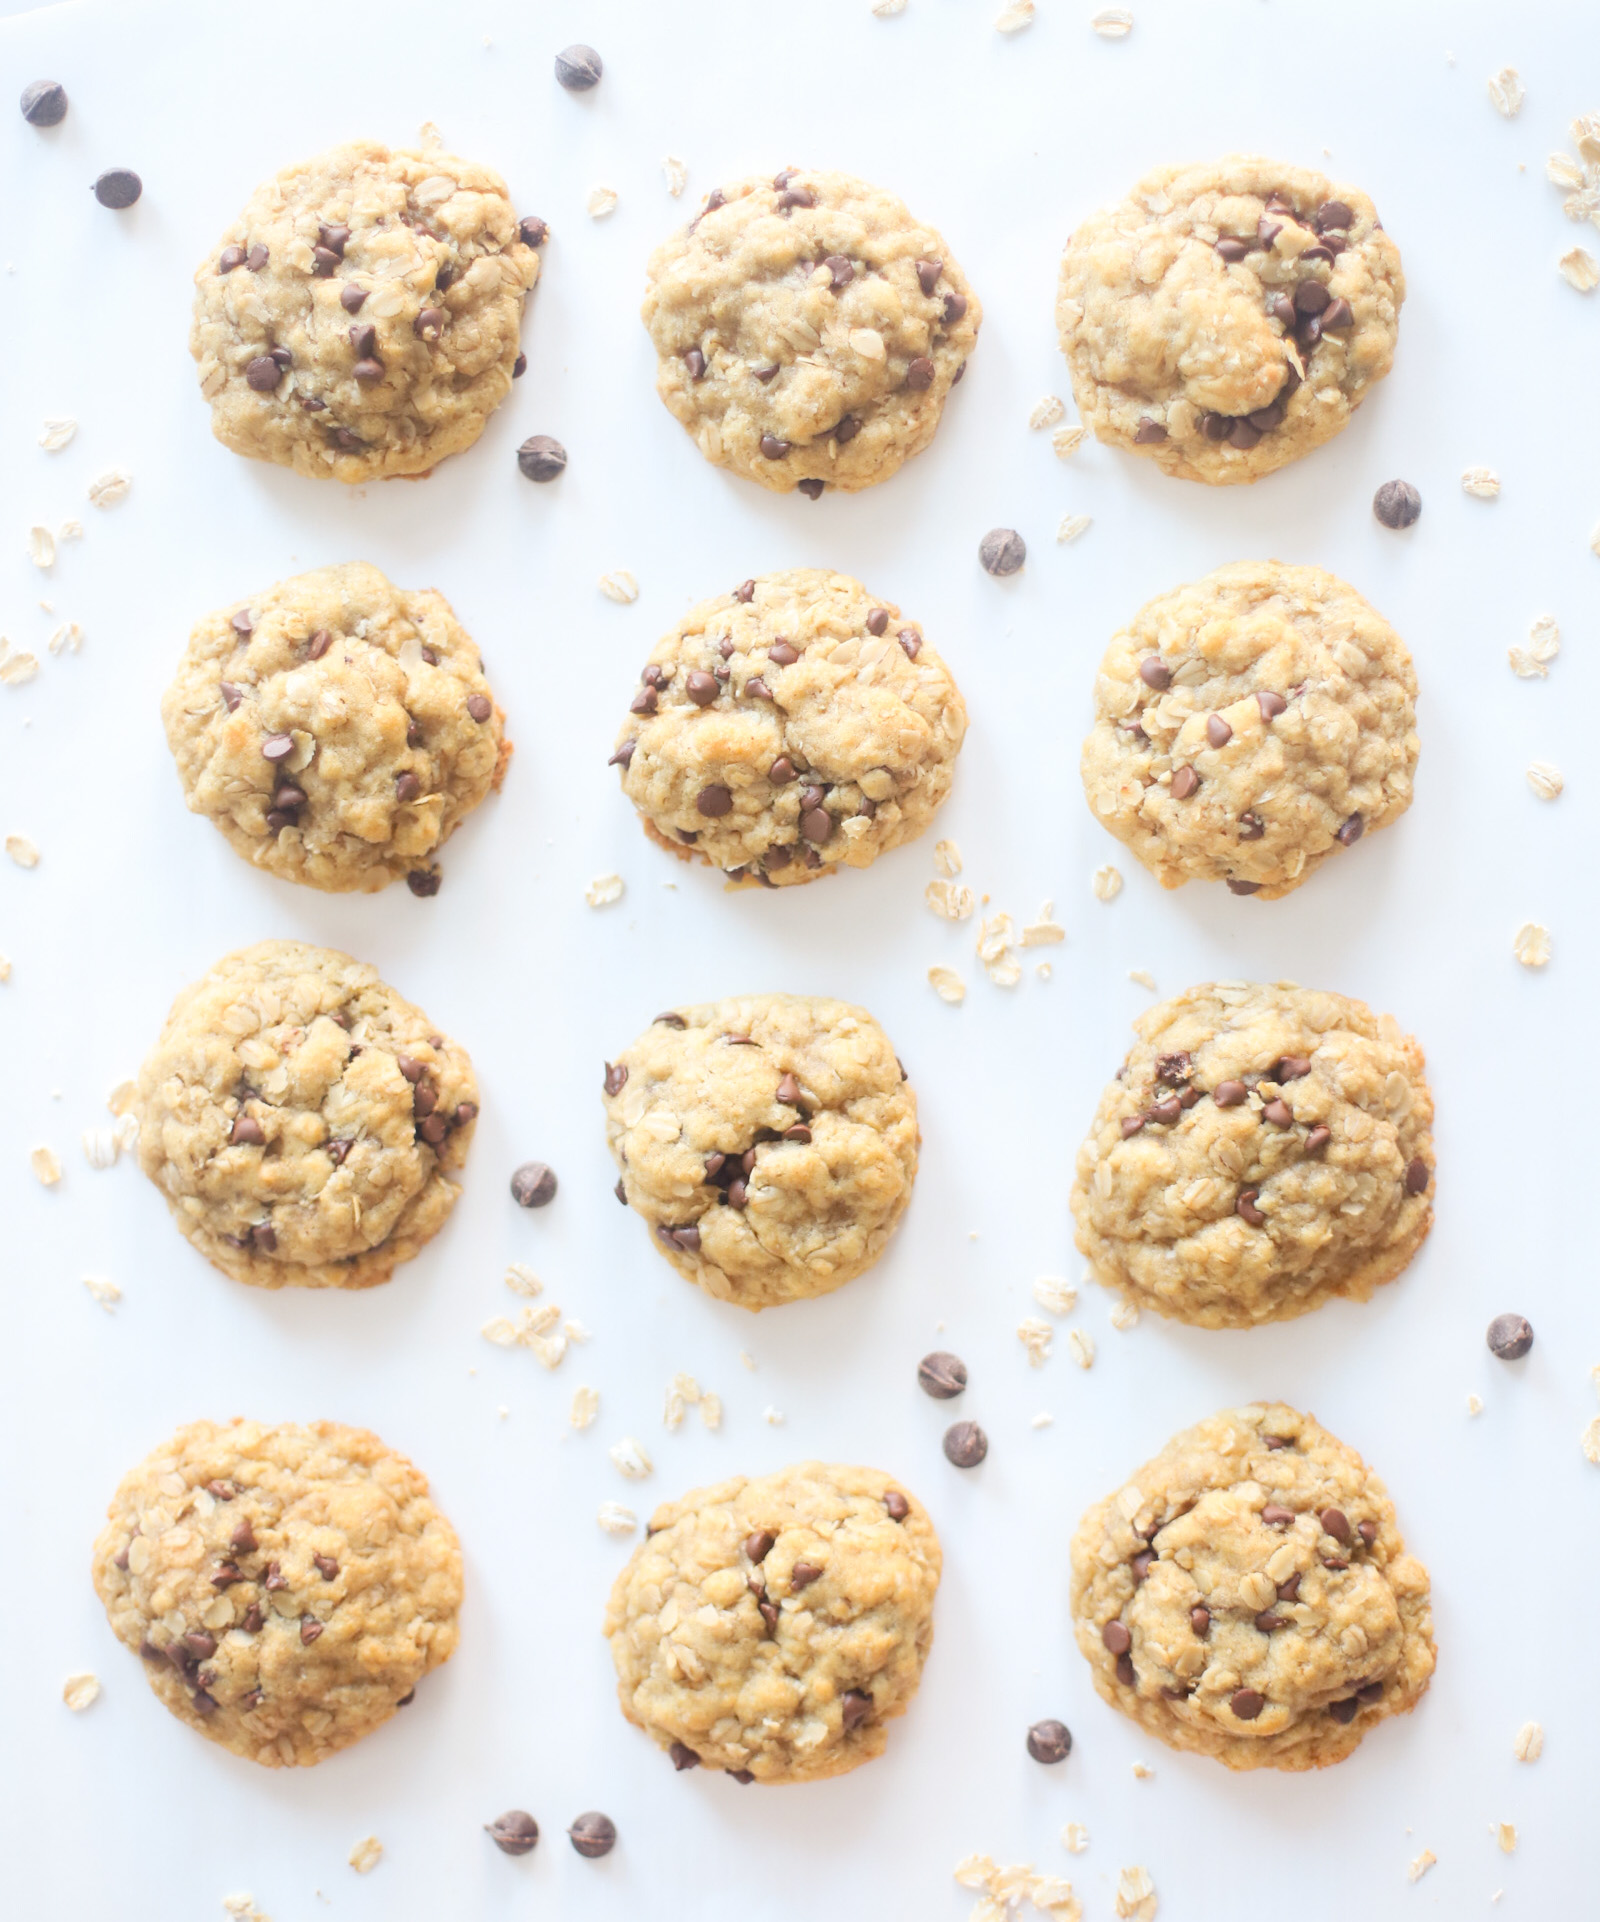 Hands down our very favorite oatmeal chocolate chip cookies, these heavenly oatmeal cookies are moist in the center, crisp and chewy on the outside, and totally delicious. They’re also super easy to make all in one bowl, and can easily be made dairy-free, vegan, or gluten-free!